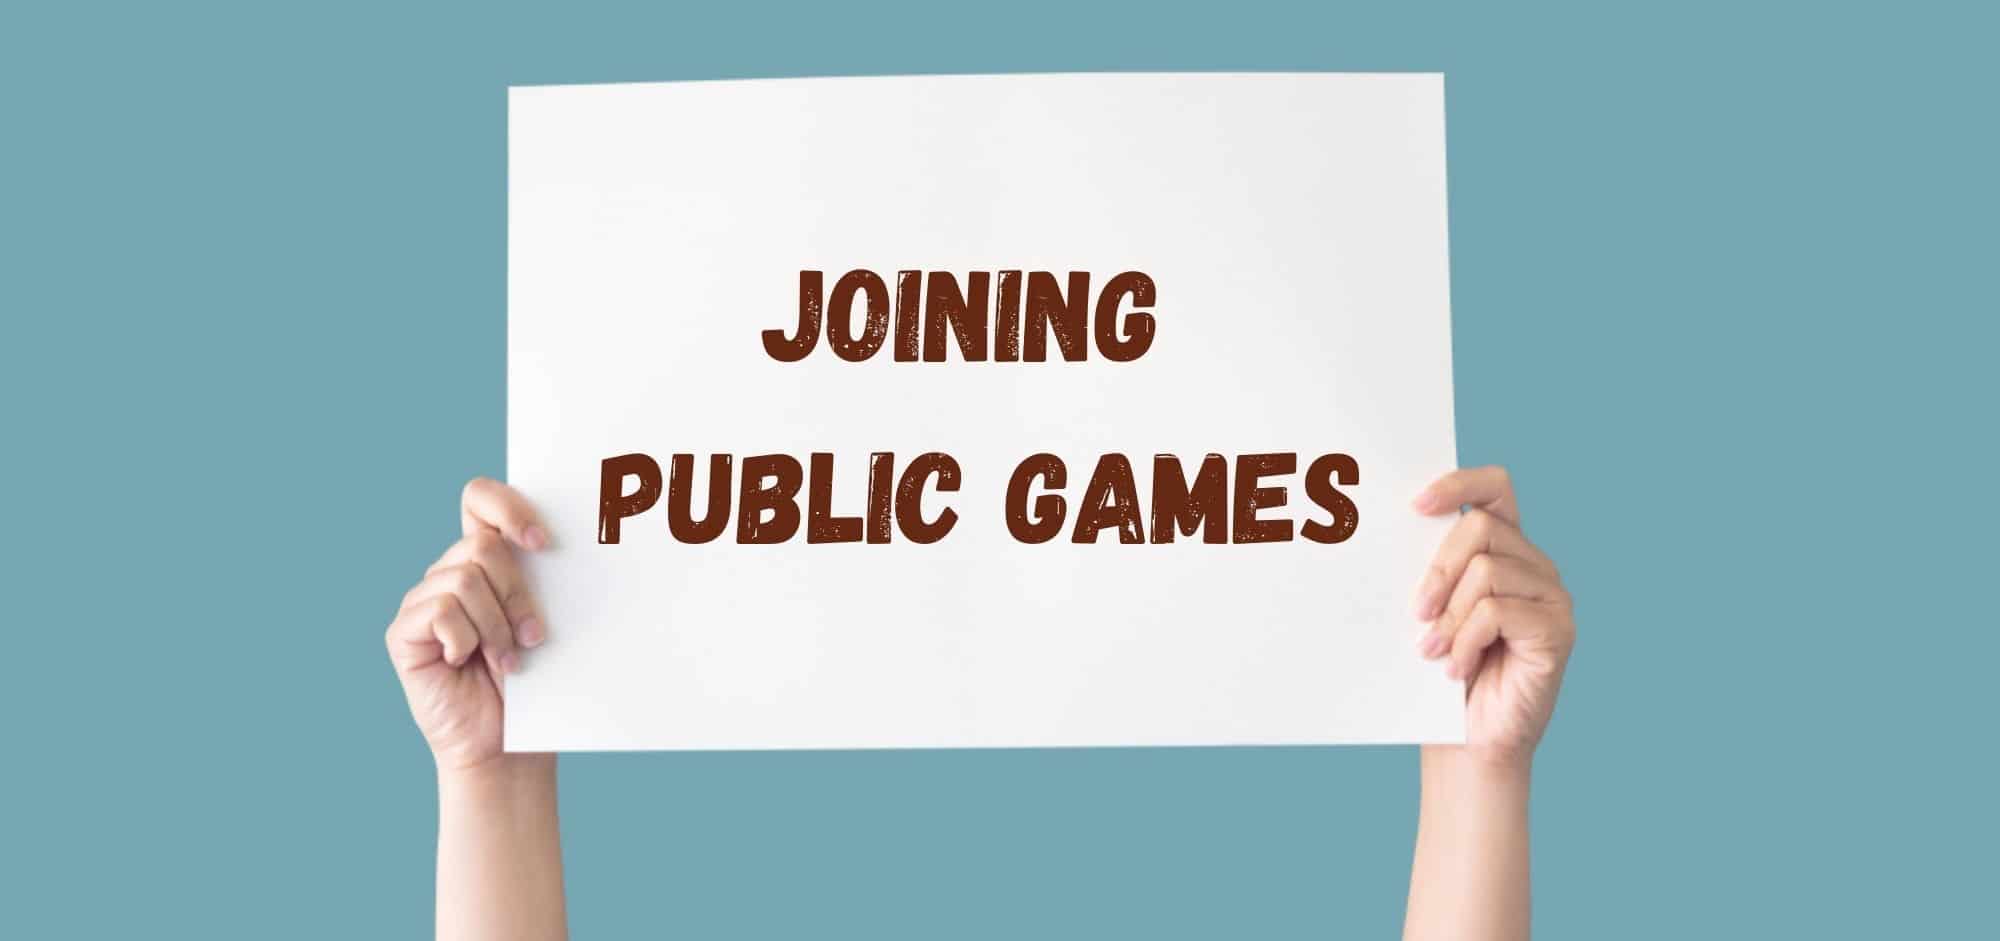 Joining public games